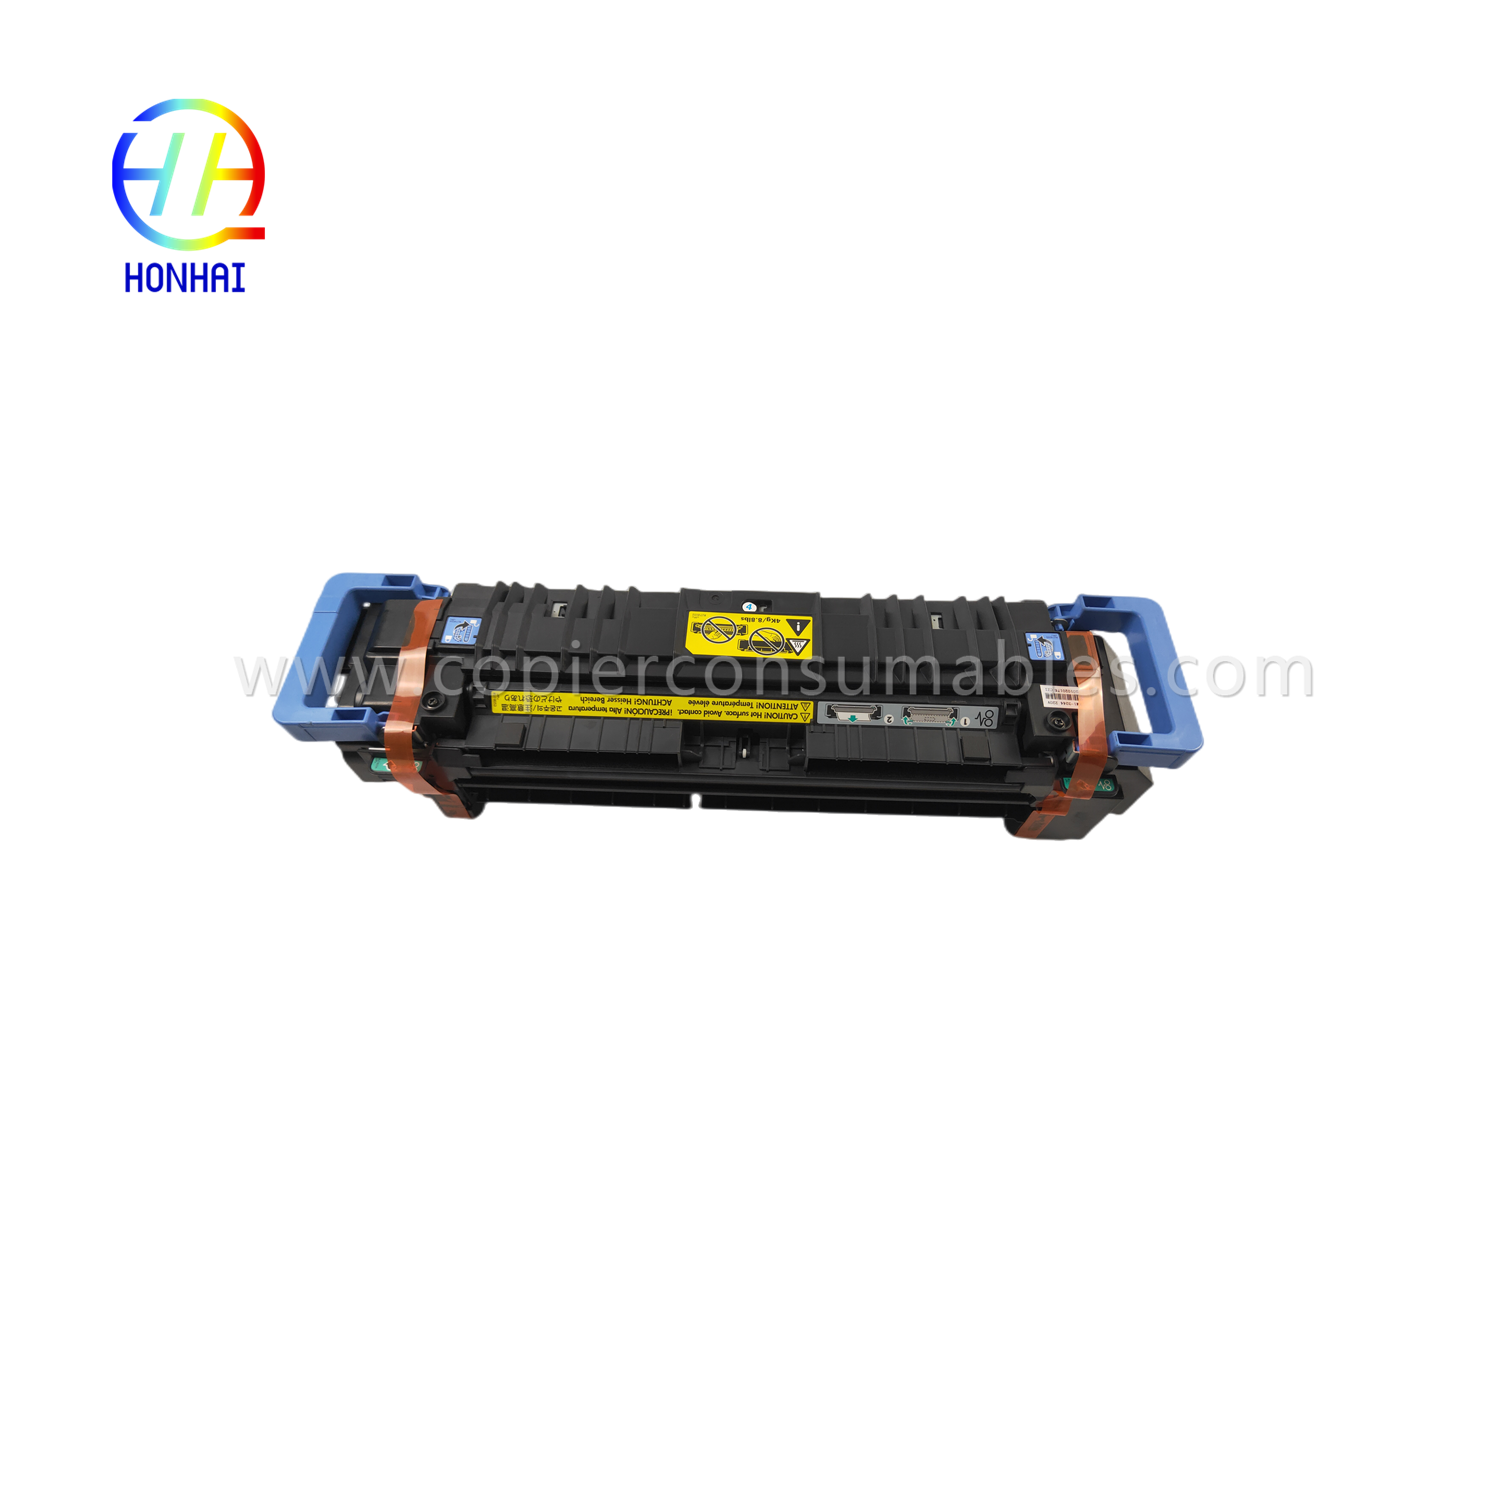 https://www.copierconsumables.com/fuser-assembly-unit-for-hp-m855-m880-m855dn-m855xh-m880z-m880z-c1n54-67901-c1n58-67901-fusing-heating-productsyfixing